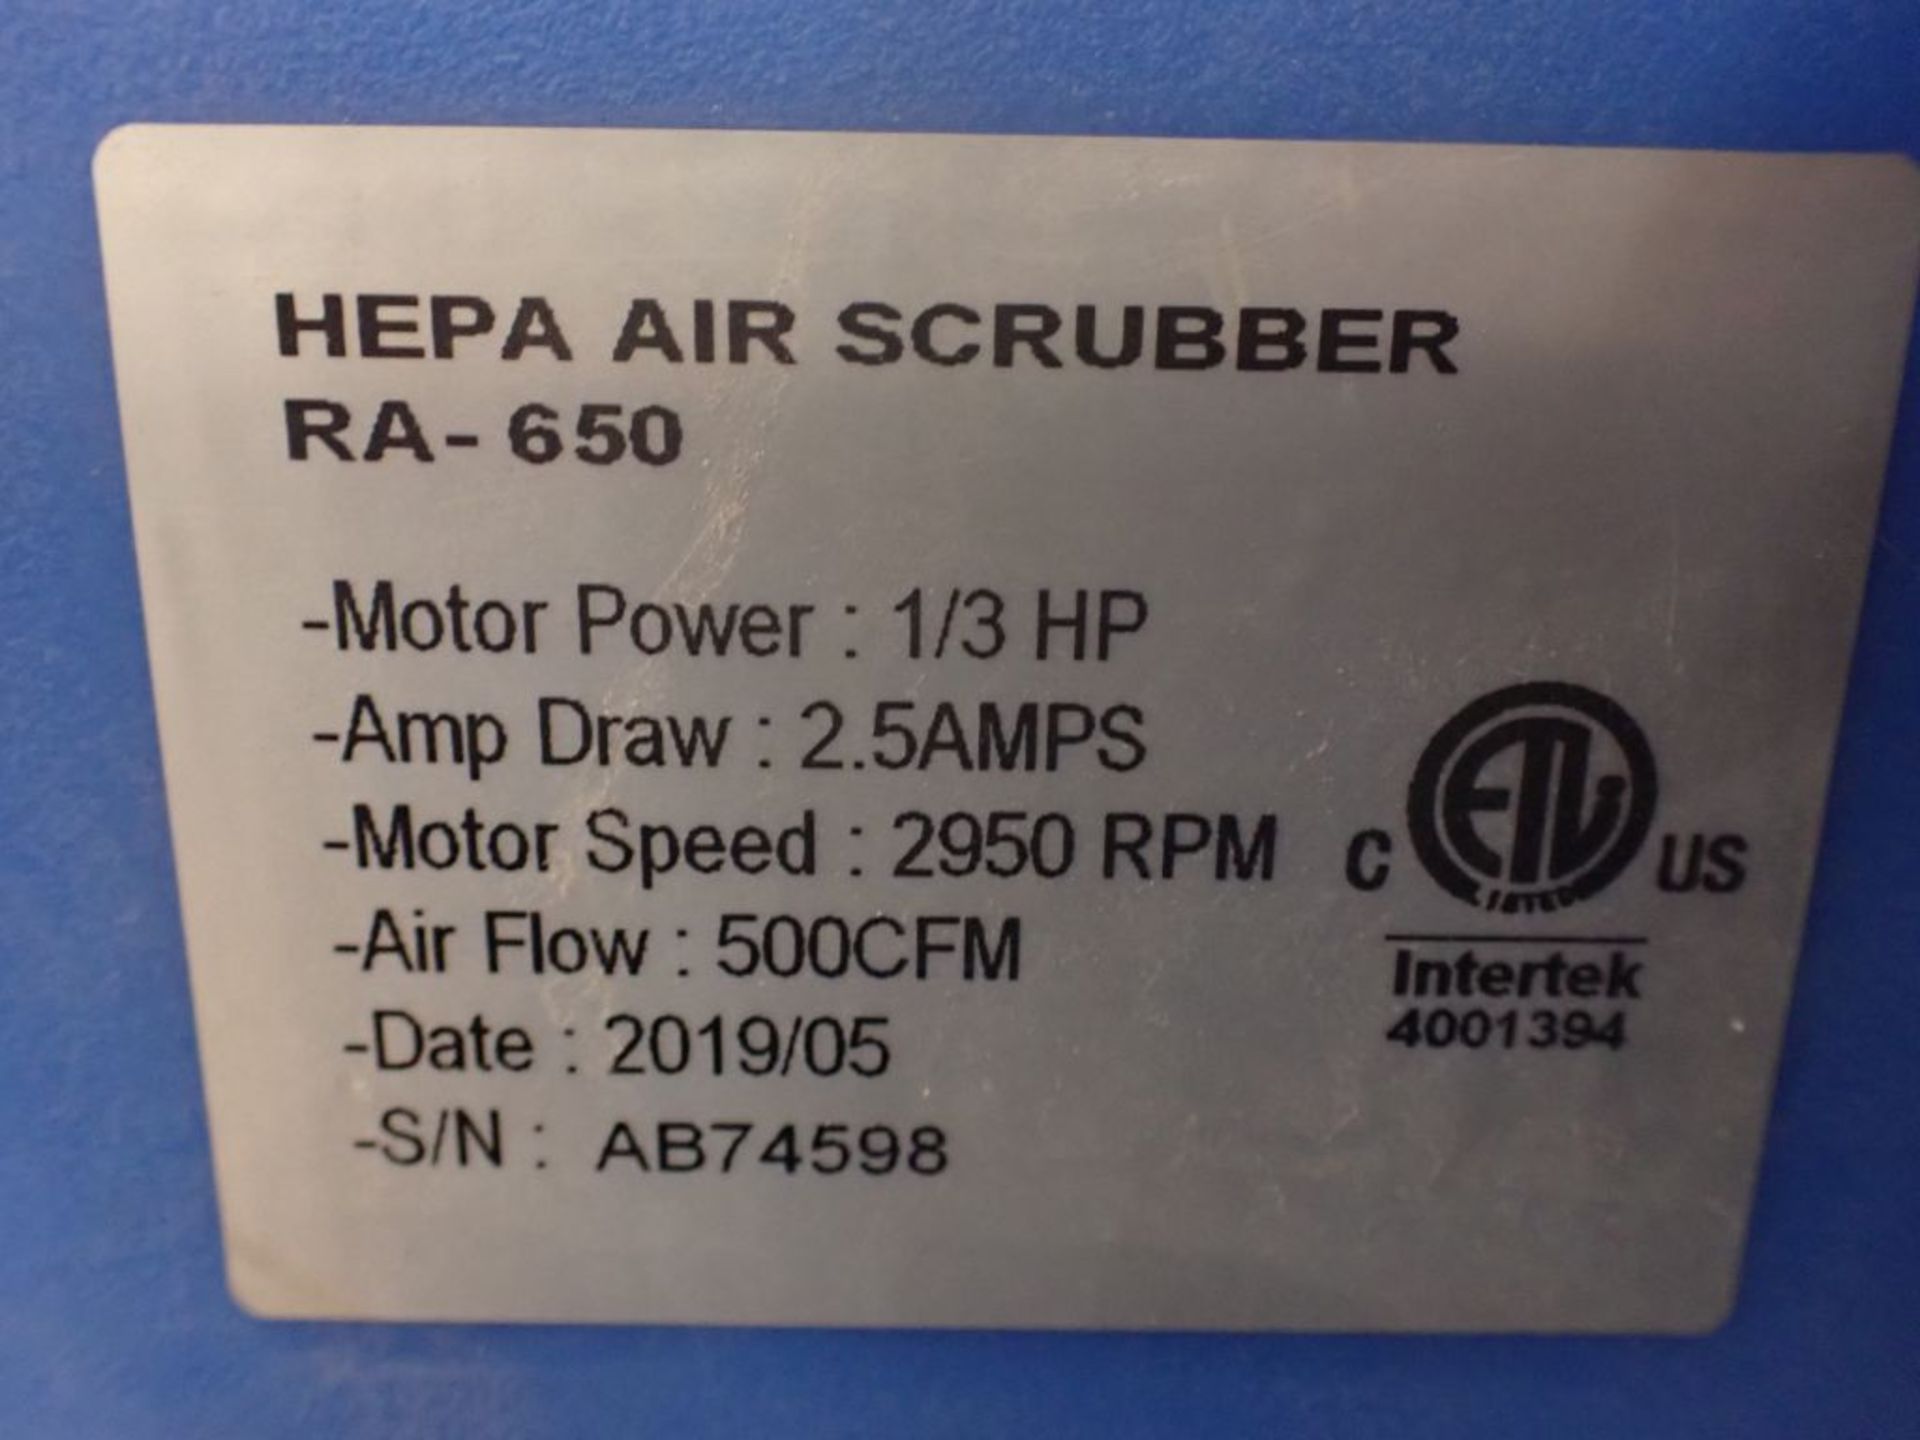 Hepa Air Scrubber | Part No. RA-650; 1/3 HP; 2.5A; 2950 RPM - Image 6 of 6